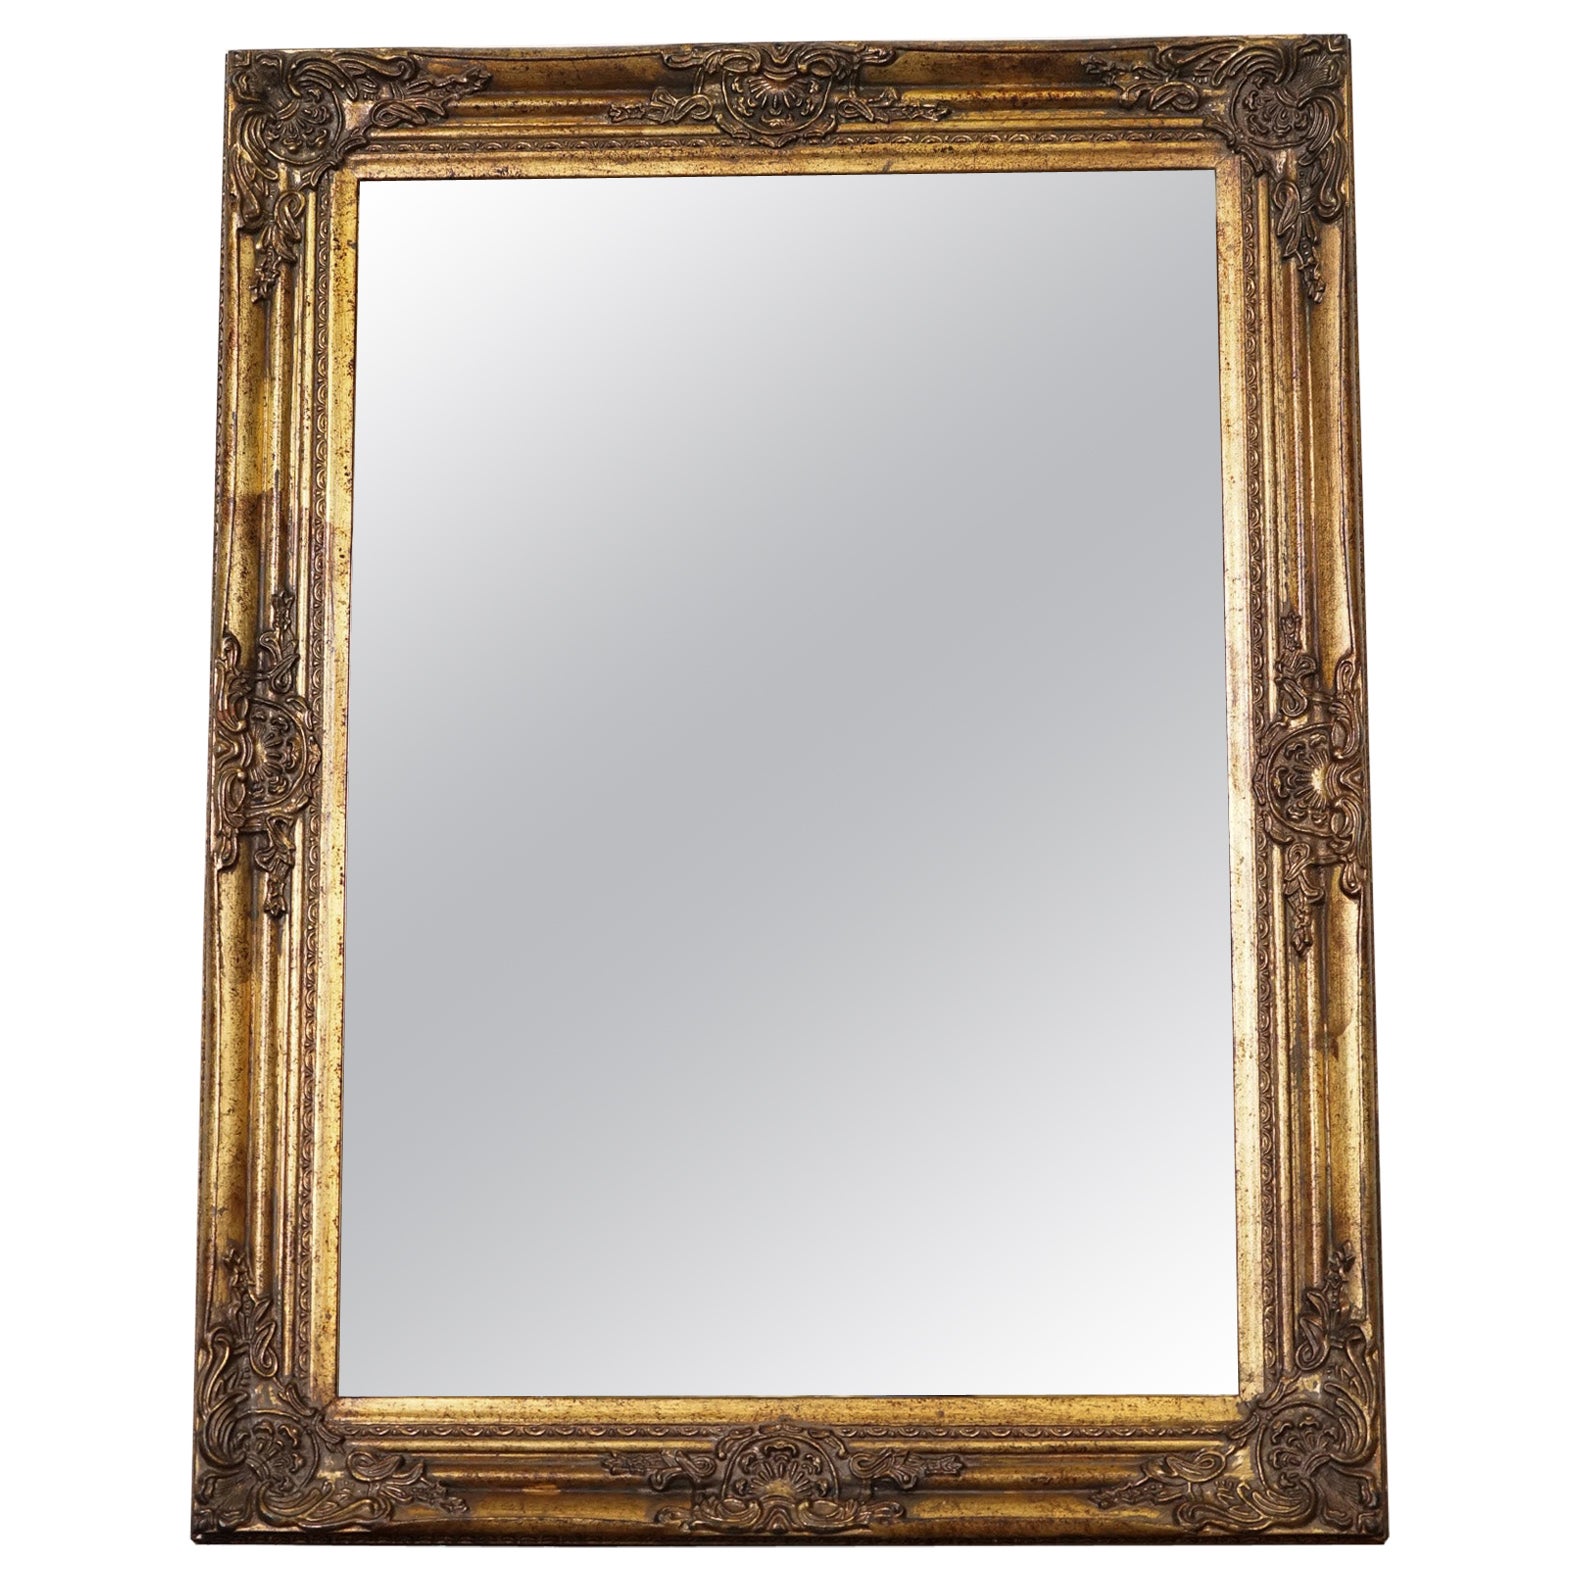 LOVELY VINTAGE FRENCH GOLD GILTED WALL MIRROR j1 For Sale